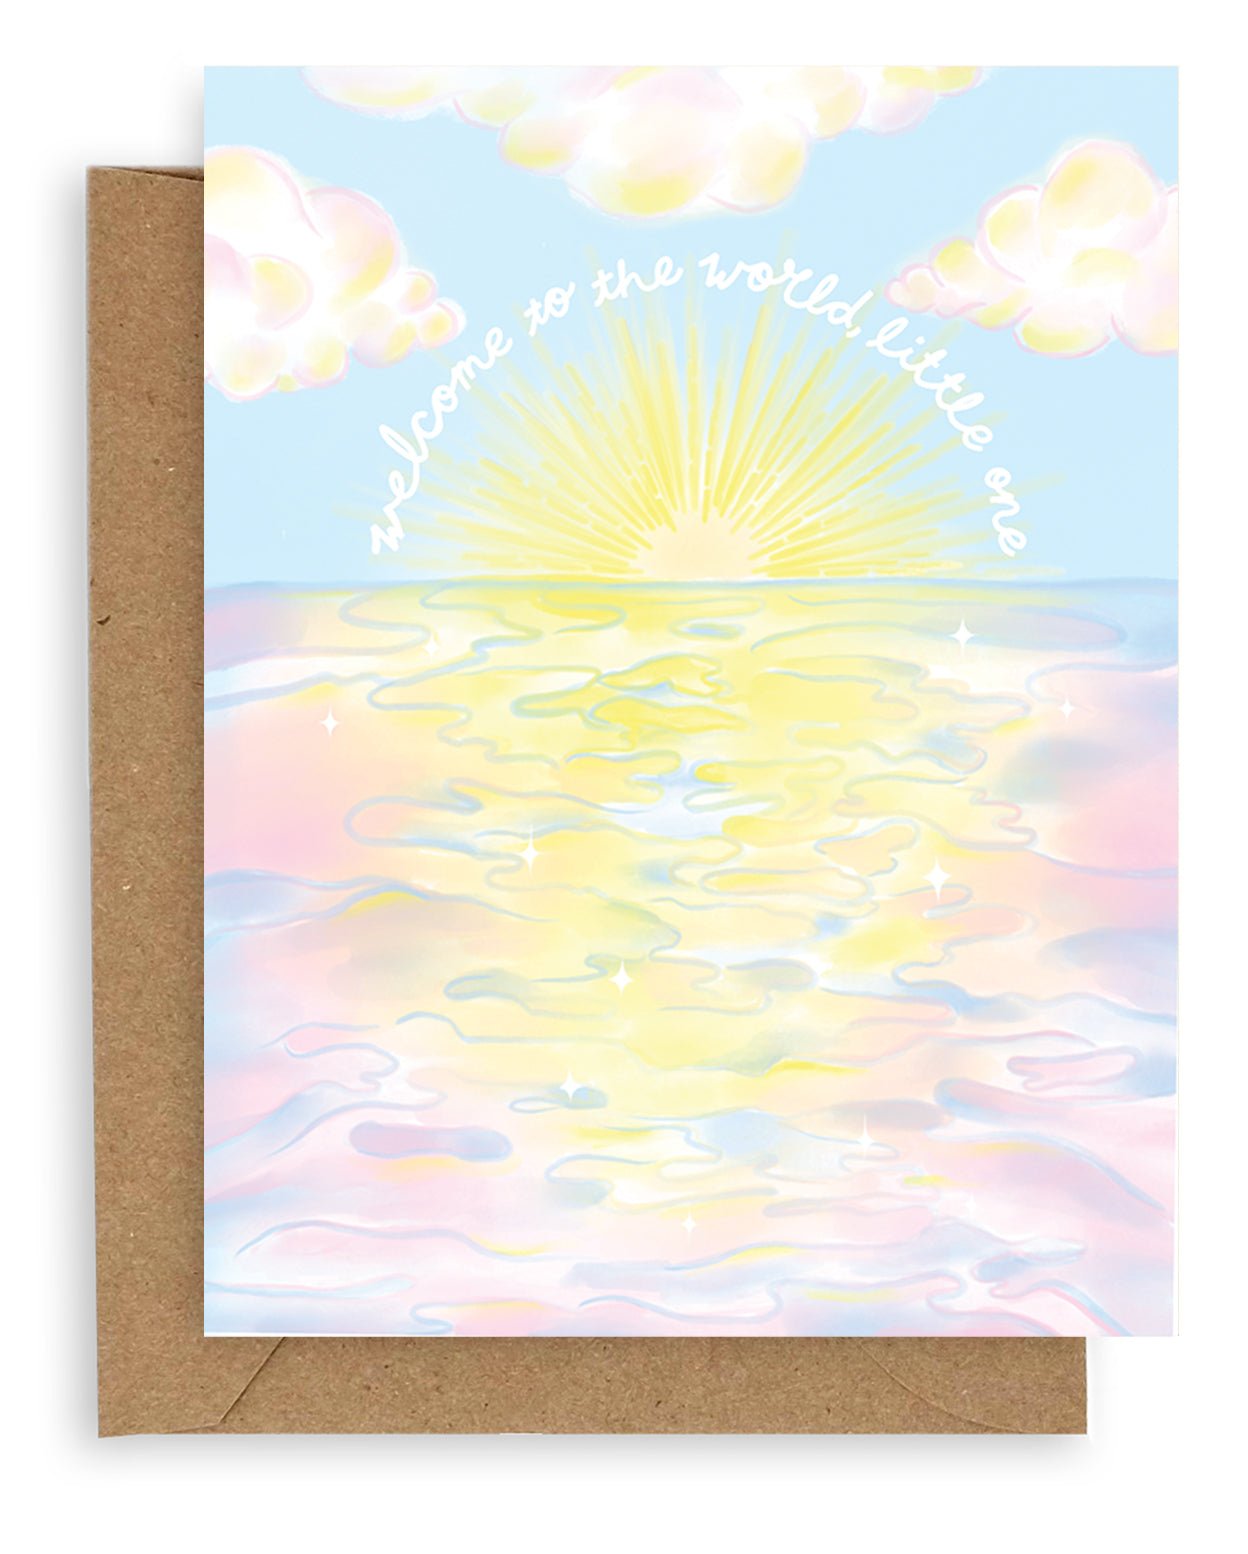 "Welcome To The World Little One" printed in white cursive font bending around a sunset over the ocean with a pink and blue cloudy landscape design printed on cardstock resting on a kraft envelope.